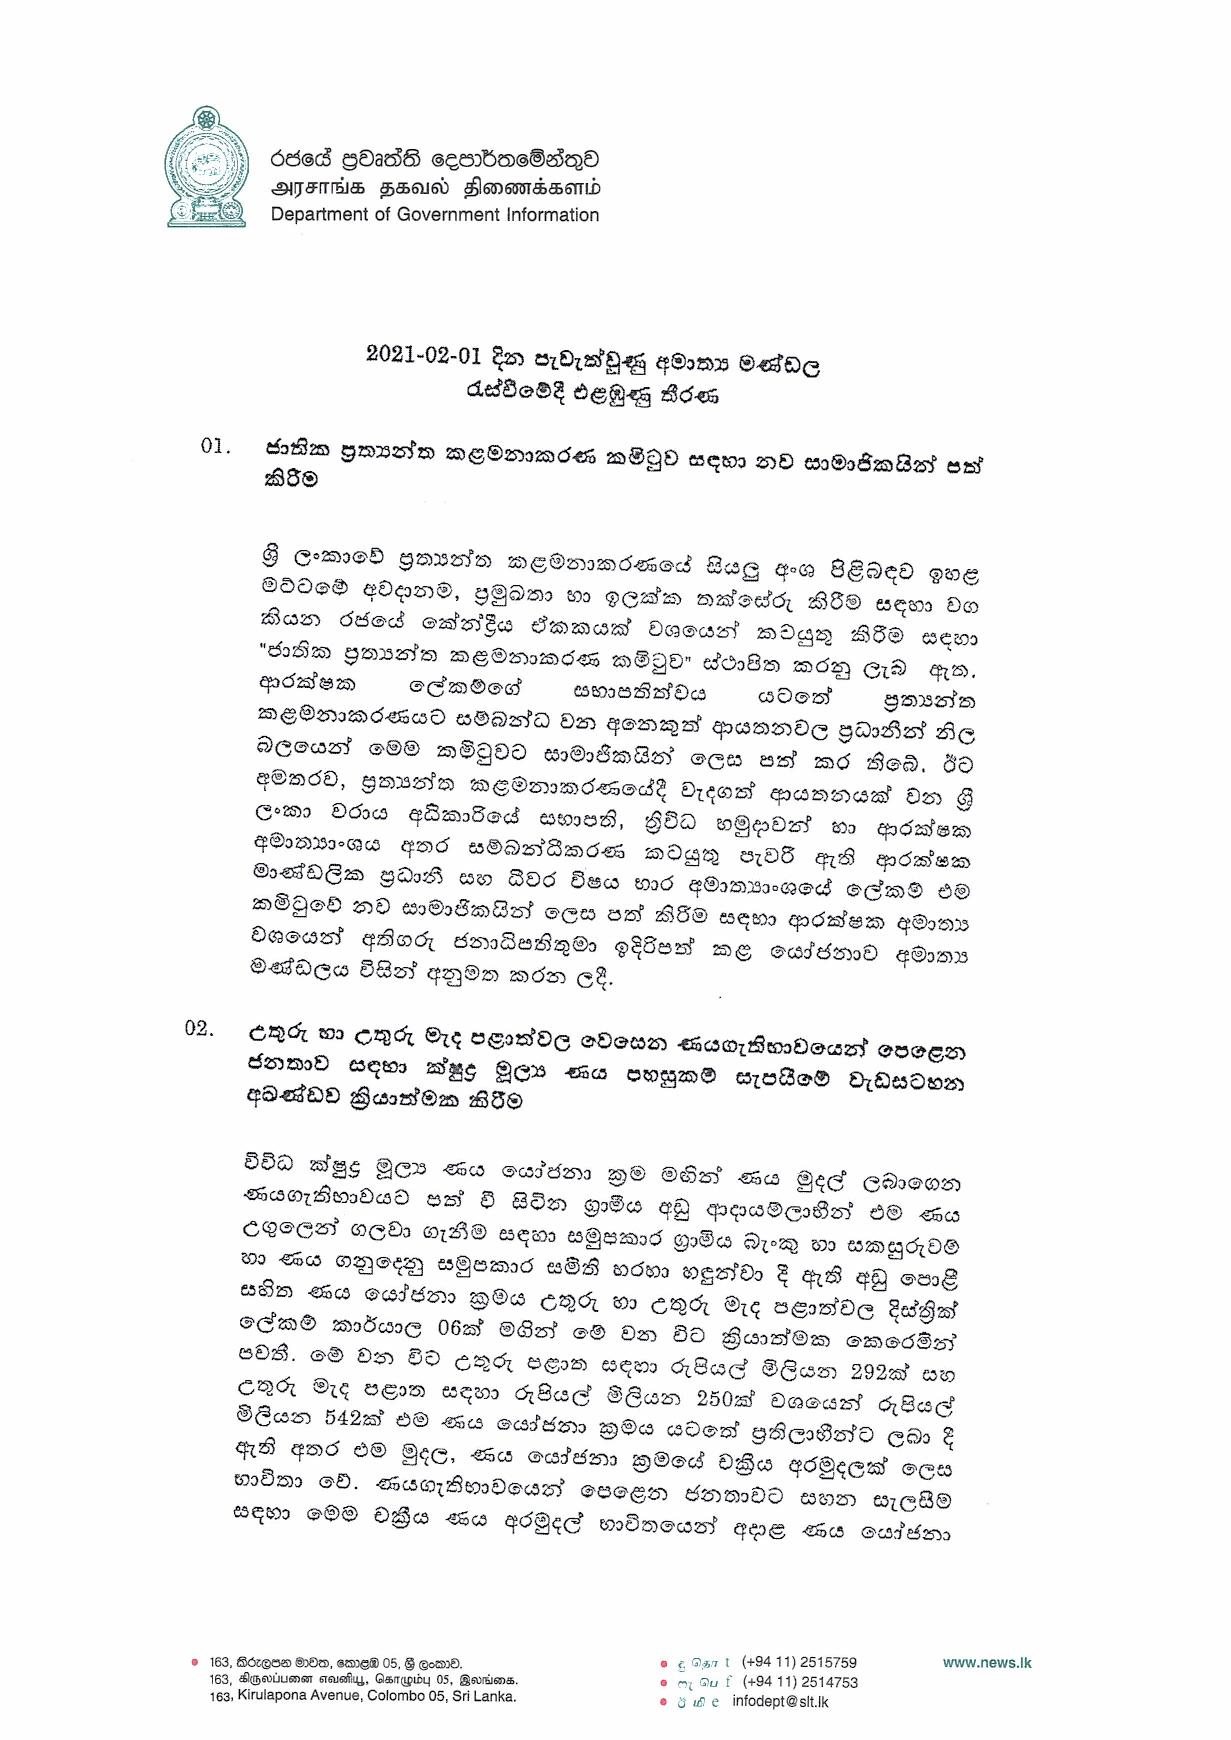 Cabinet Decision on 01.02.2021 page 001 1